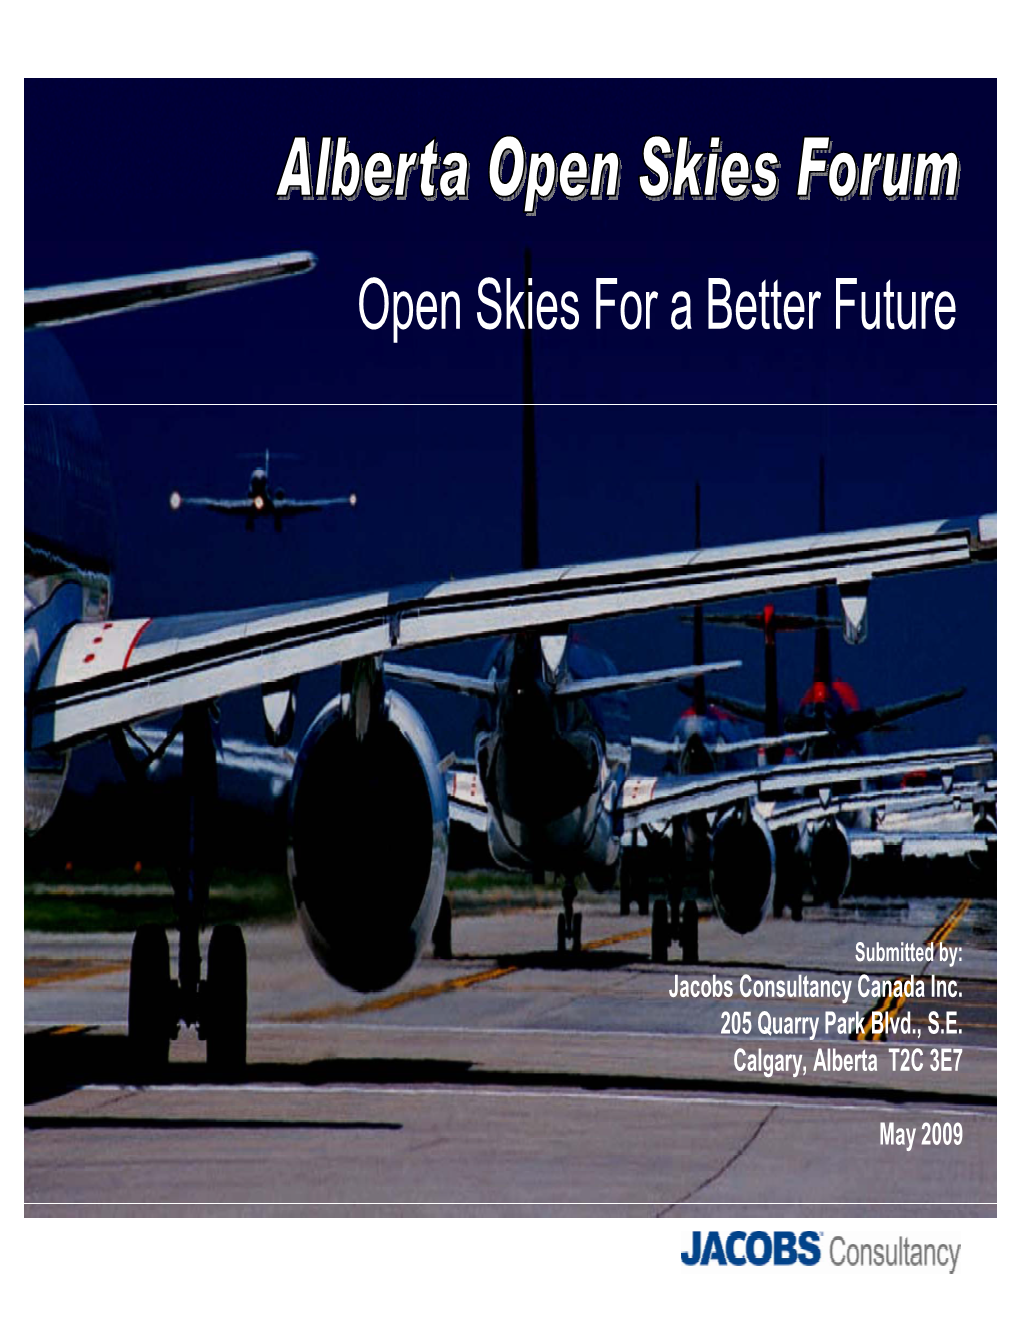 Open Skies for a Better Future